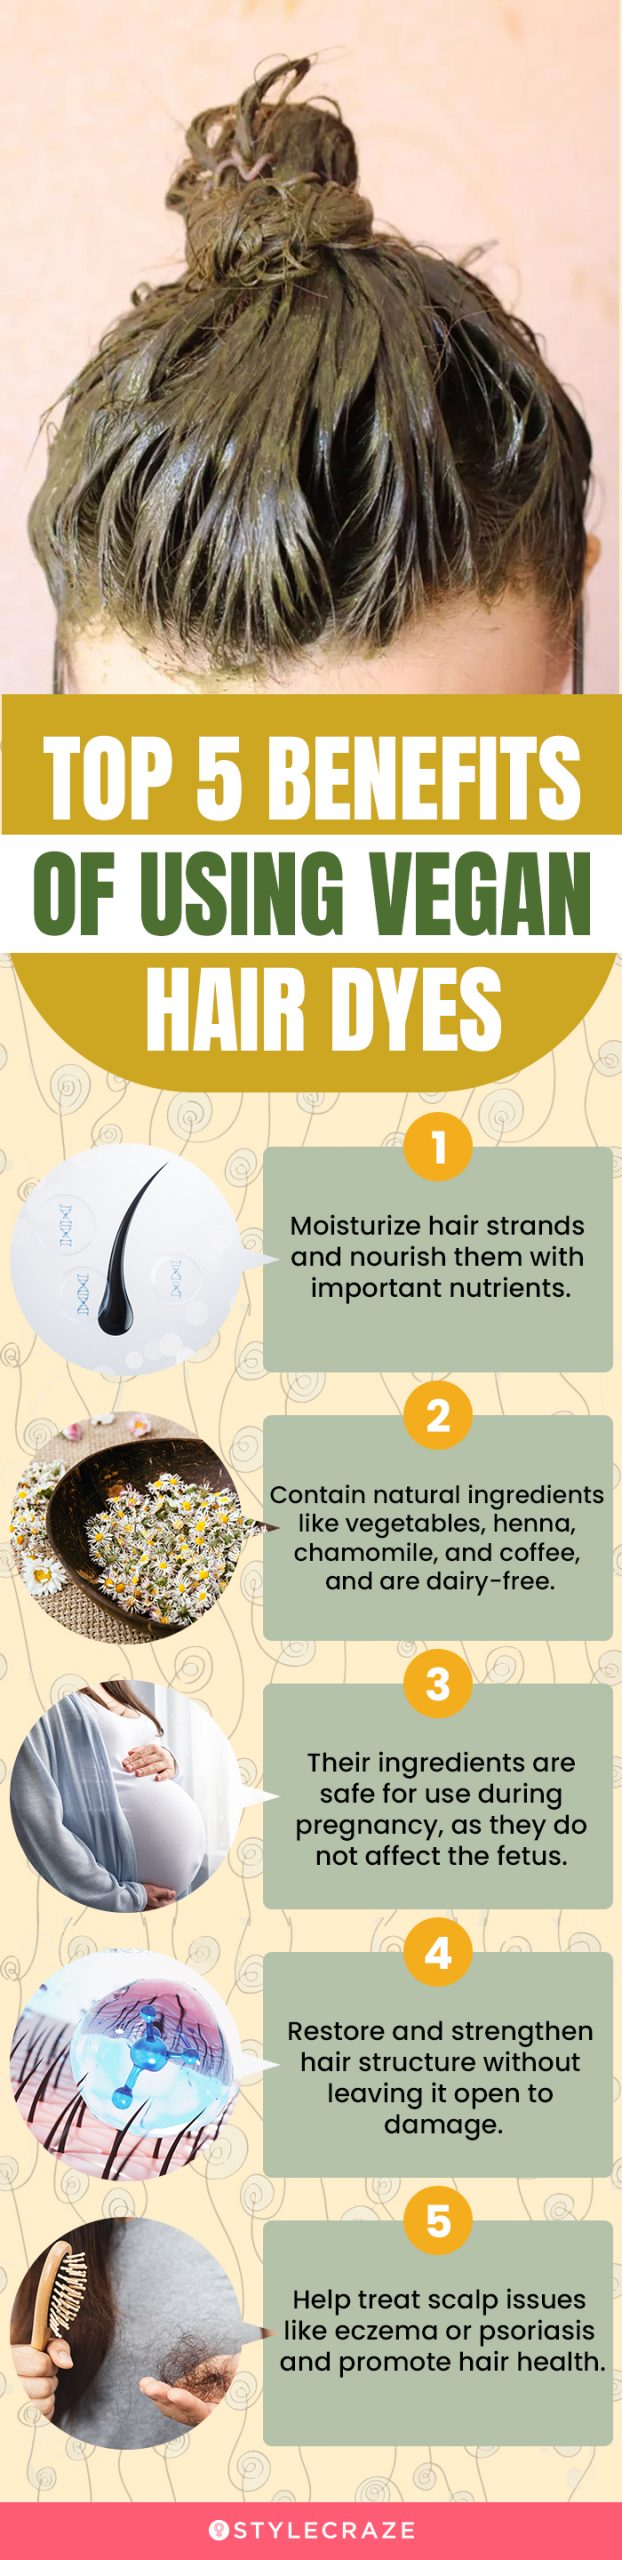 Top 5 Benefits Of Using Vegan Hair Dyes (infographic)